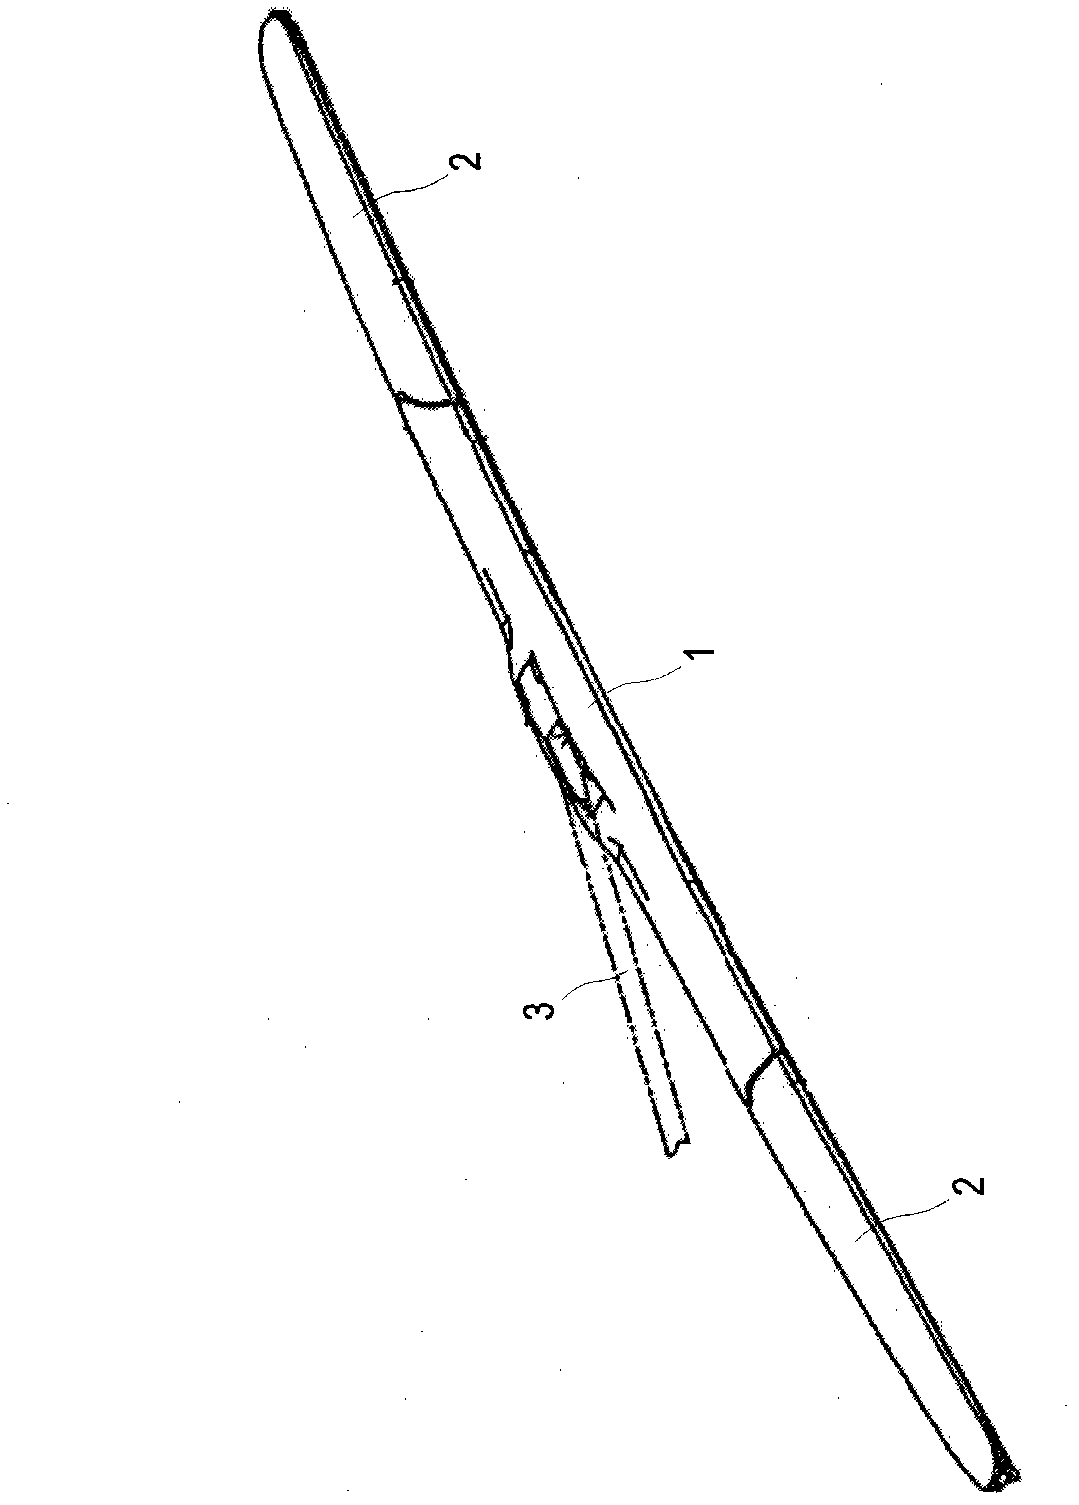 Adjustable non-support windshield wiper structure